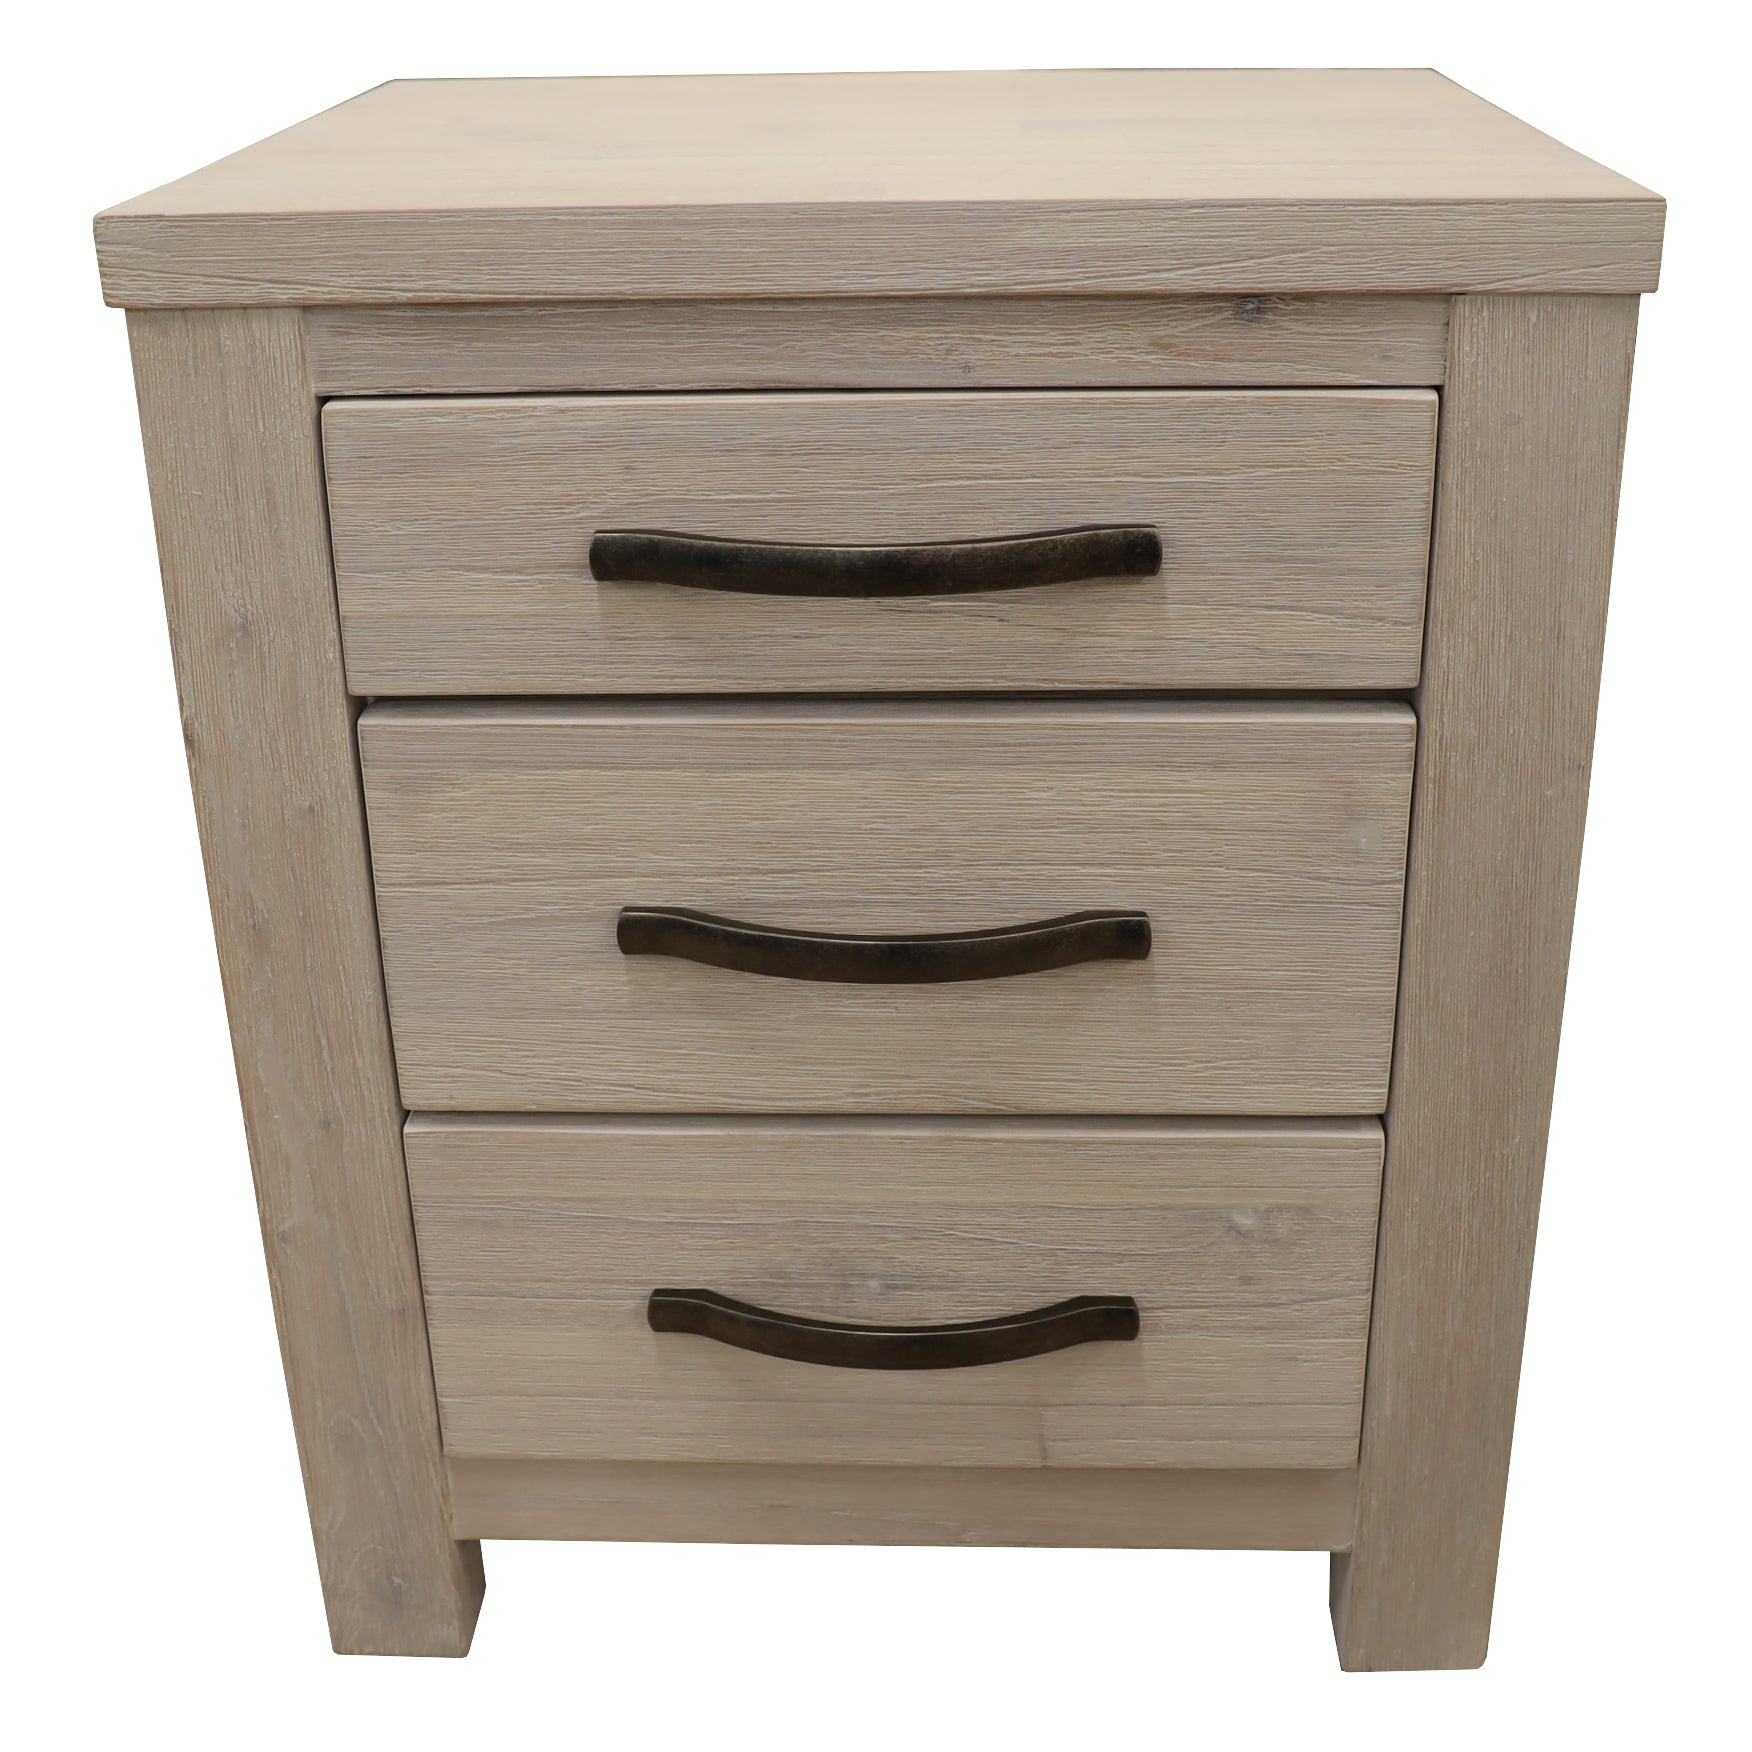 Bedside Table With Three Drawers - Brushed White